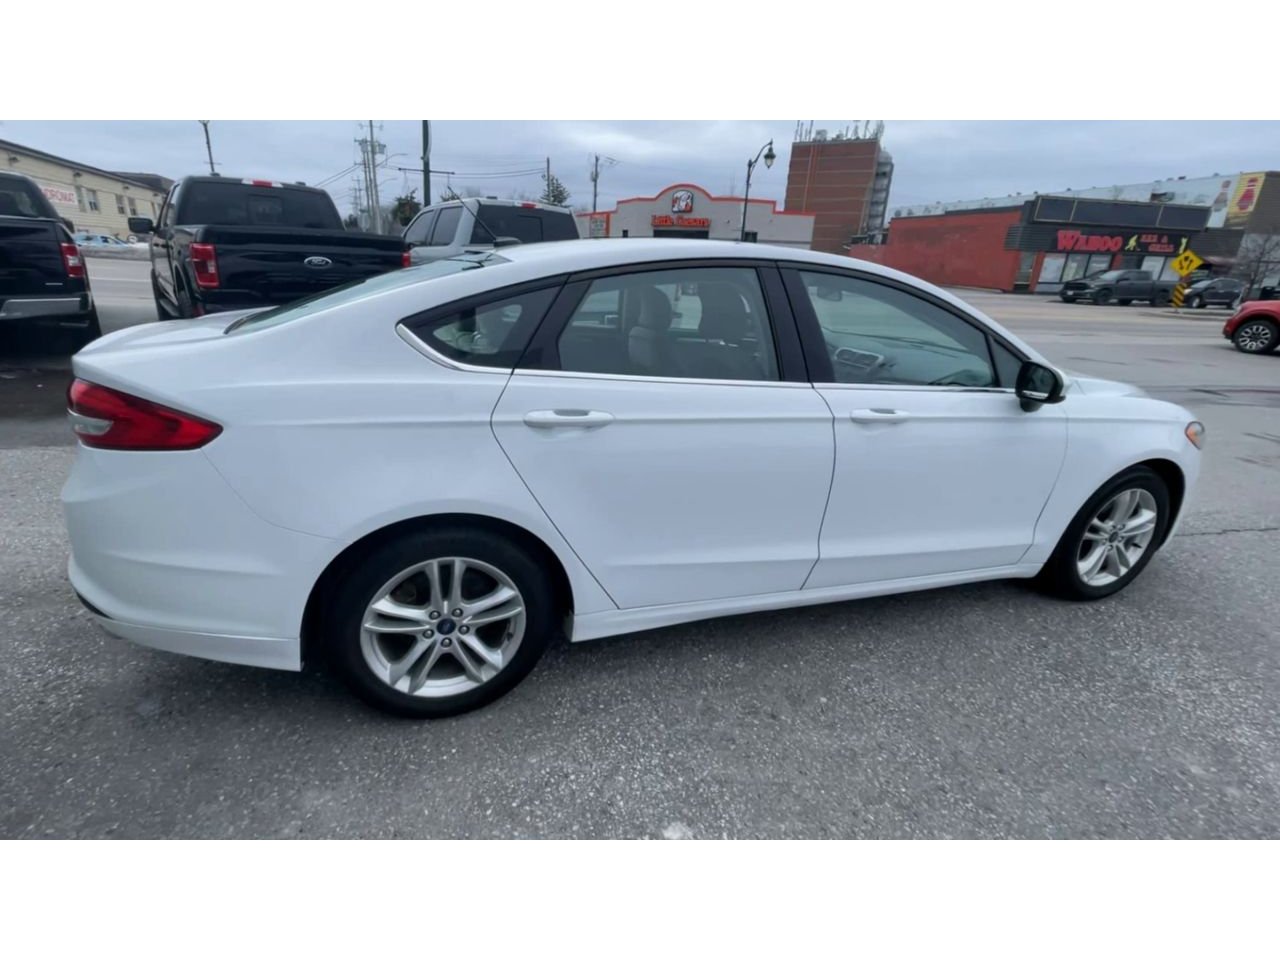 2018 Ford Fusion - P21087 Full Image 9